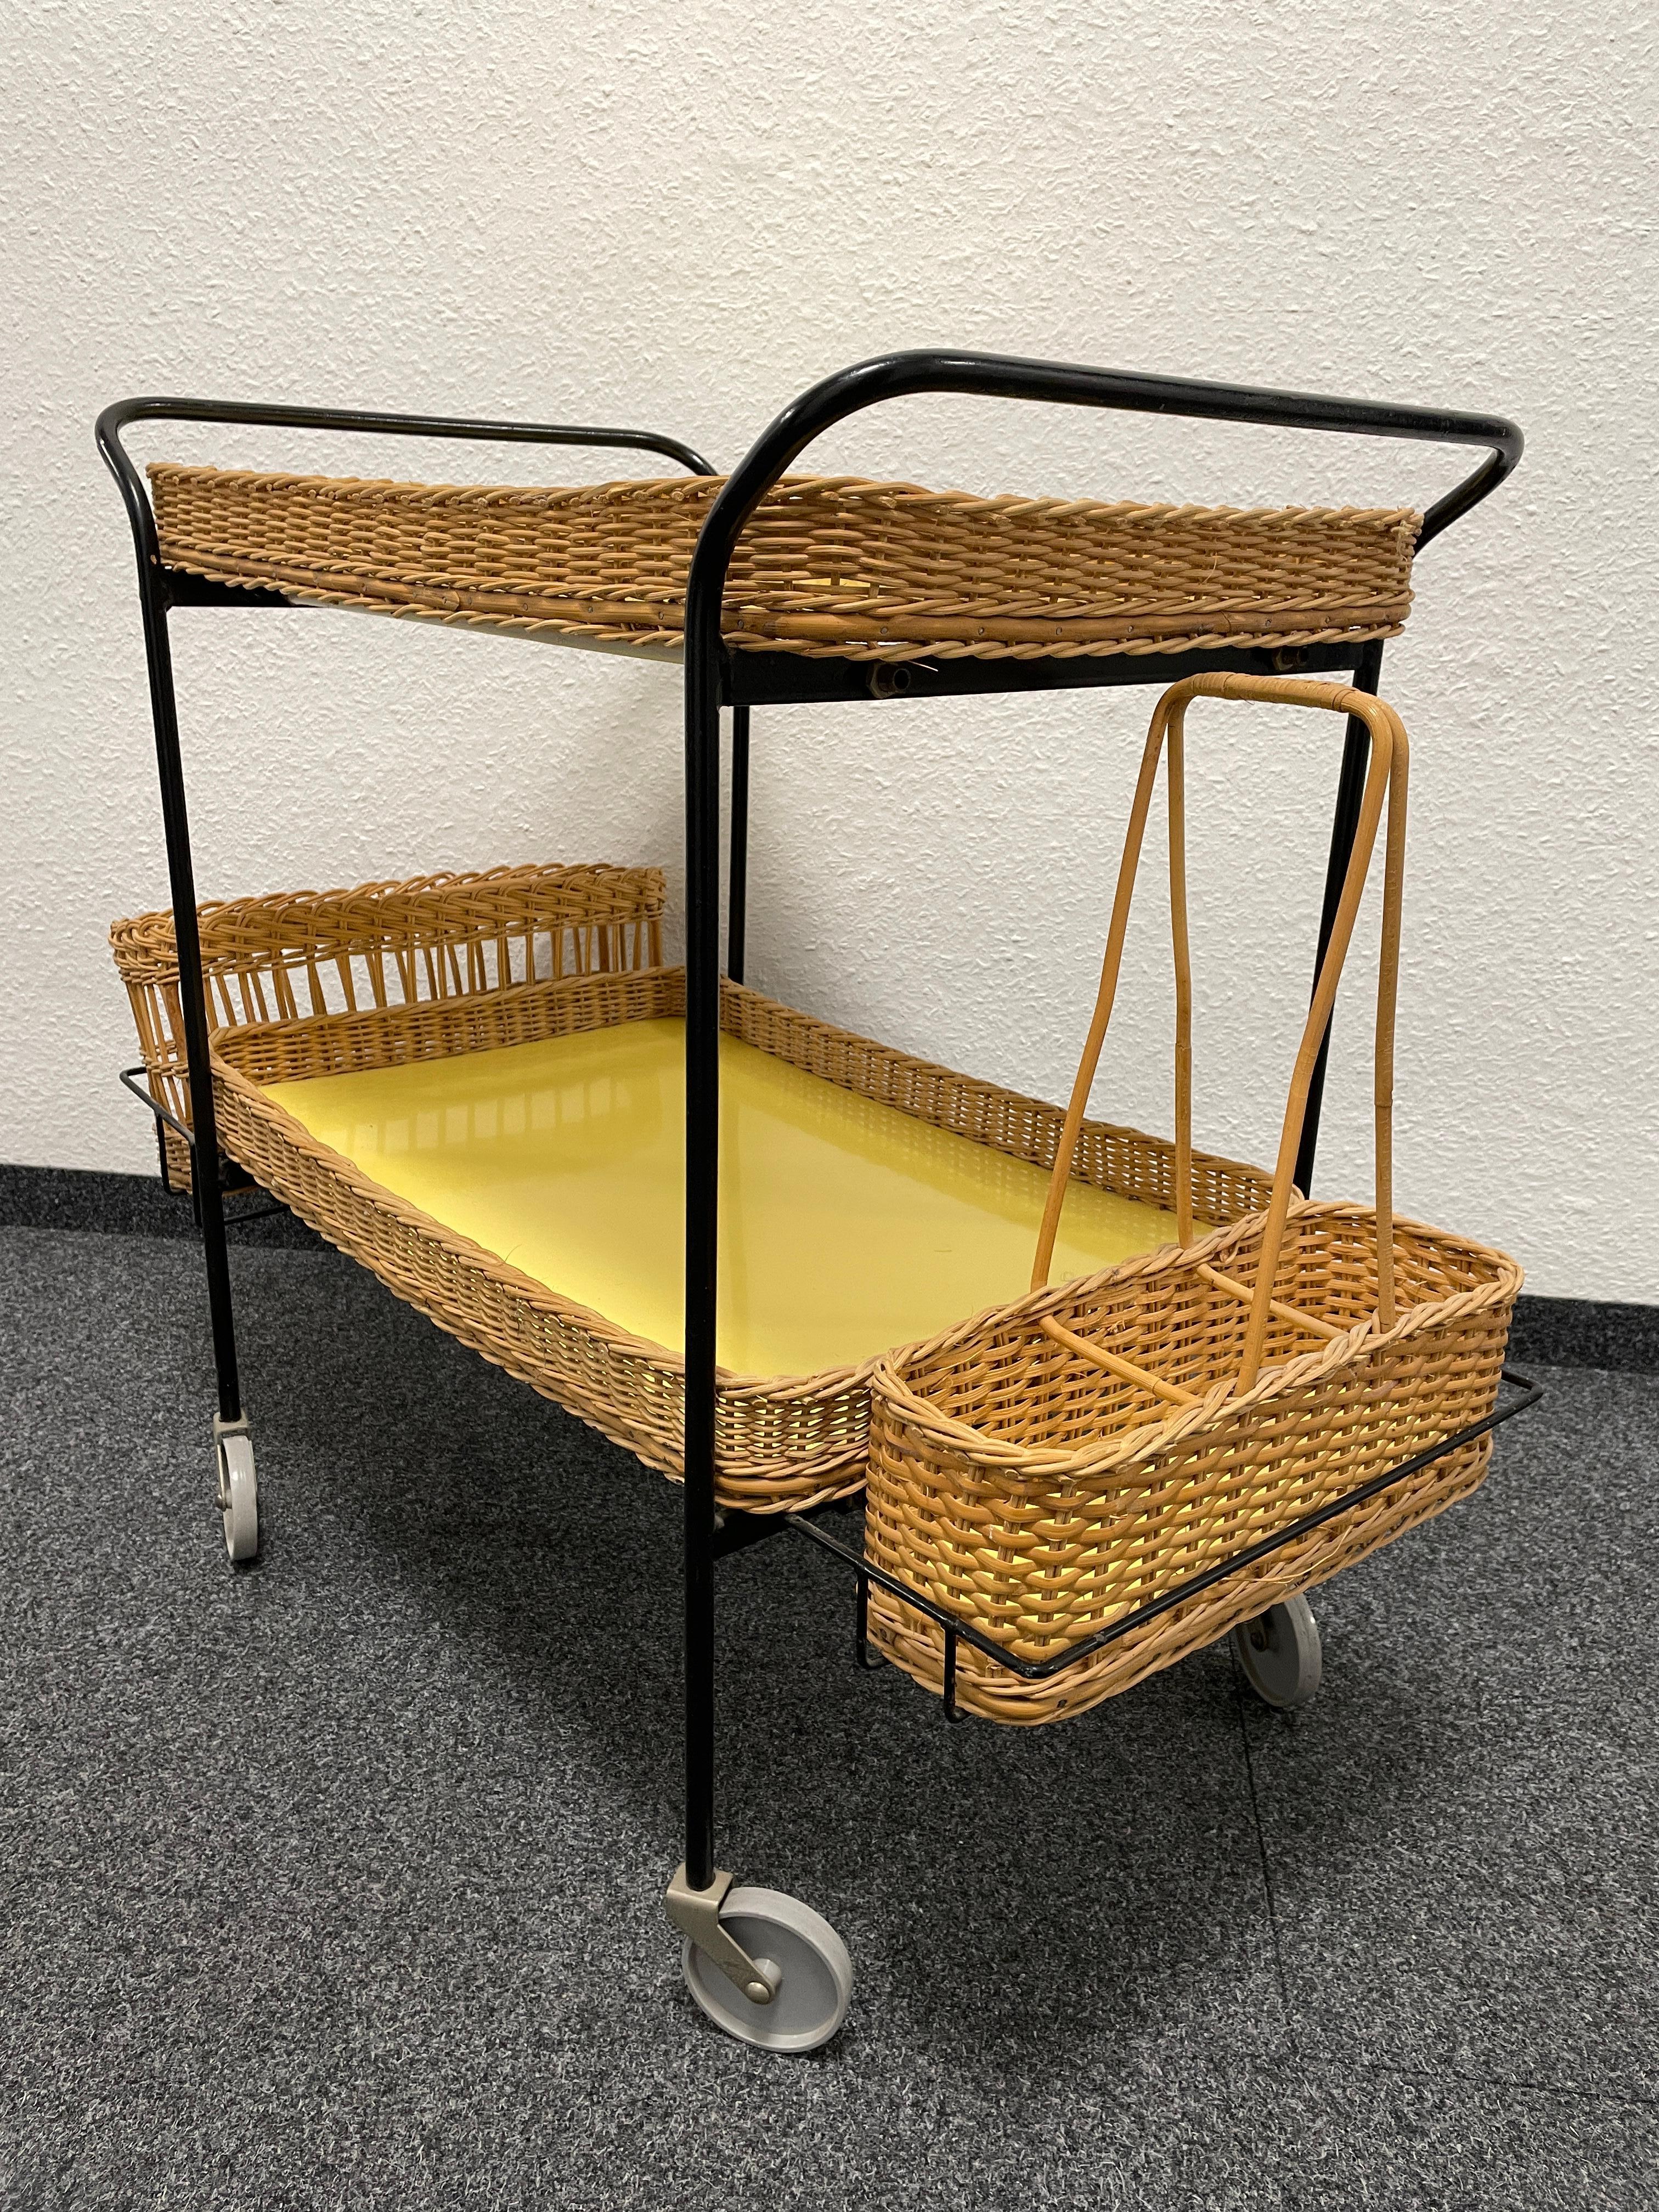 Mid-20th Century Wicker and Iron Bar Cart or Tea Trolley Table, German, 1950s For Sale